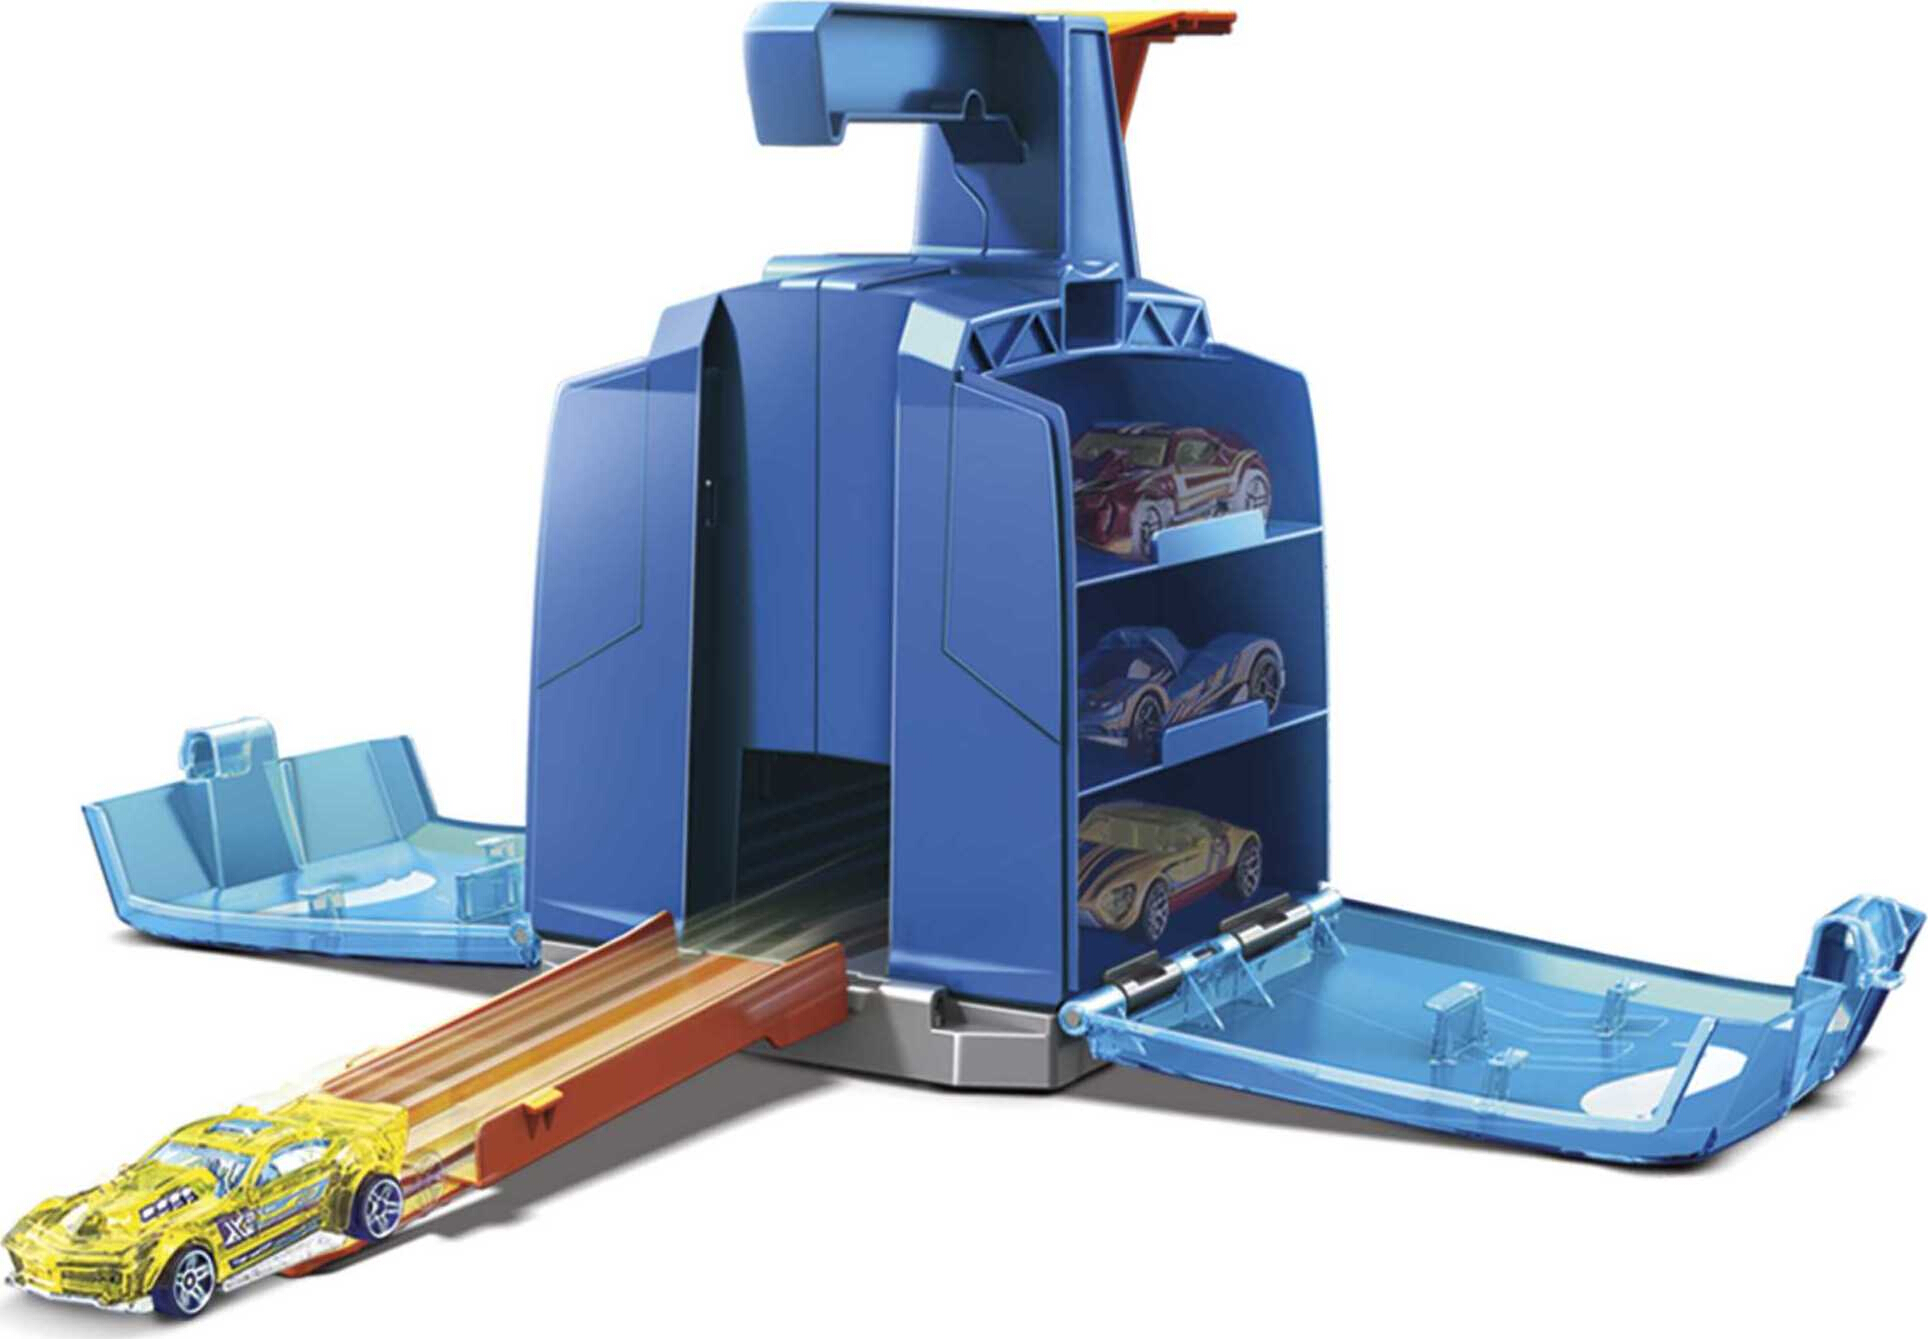 Hot Wheels Track Builder Display Launcher with 2 Toy Cars, Holds 6 1:64 Scale Vehicles - image 4 of 7